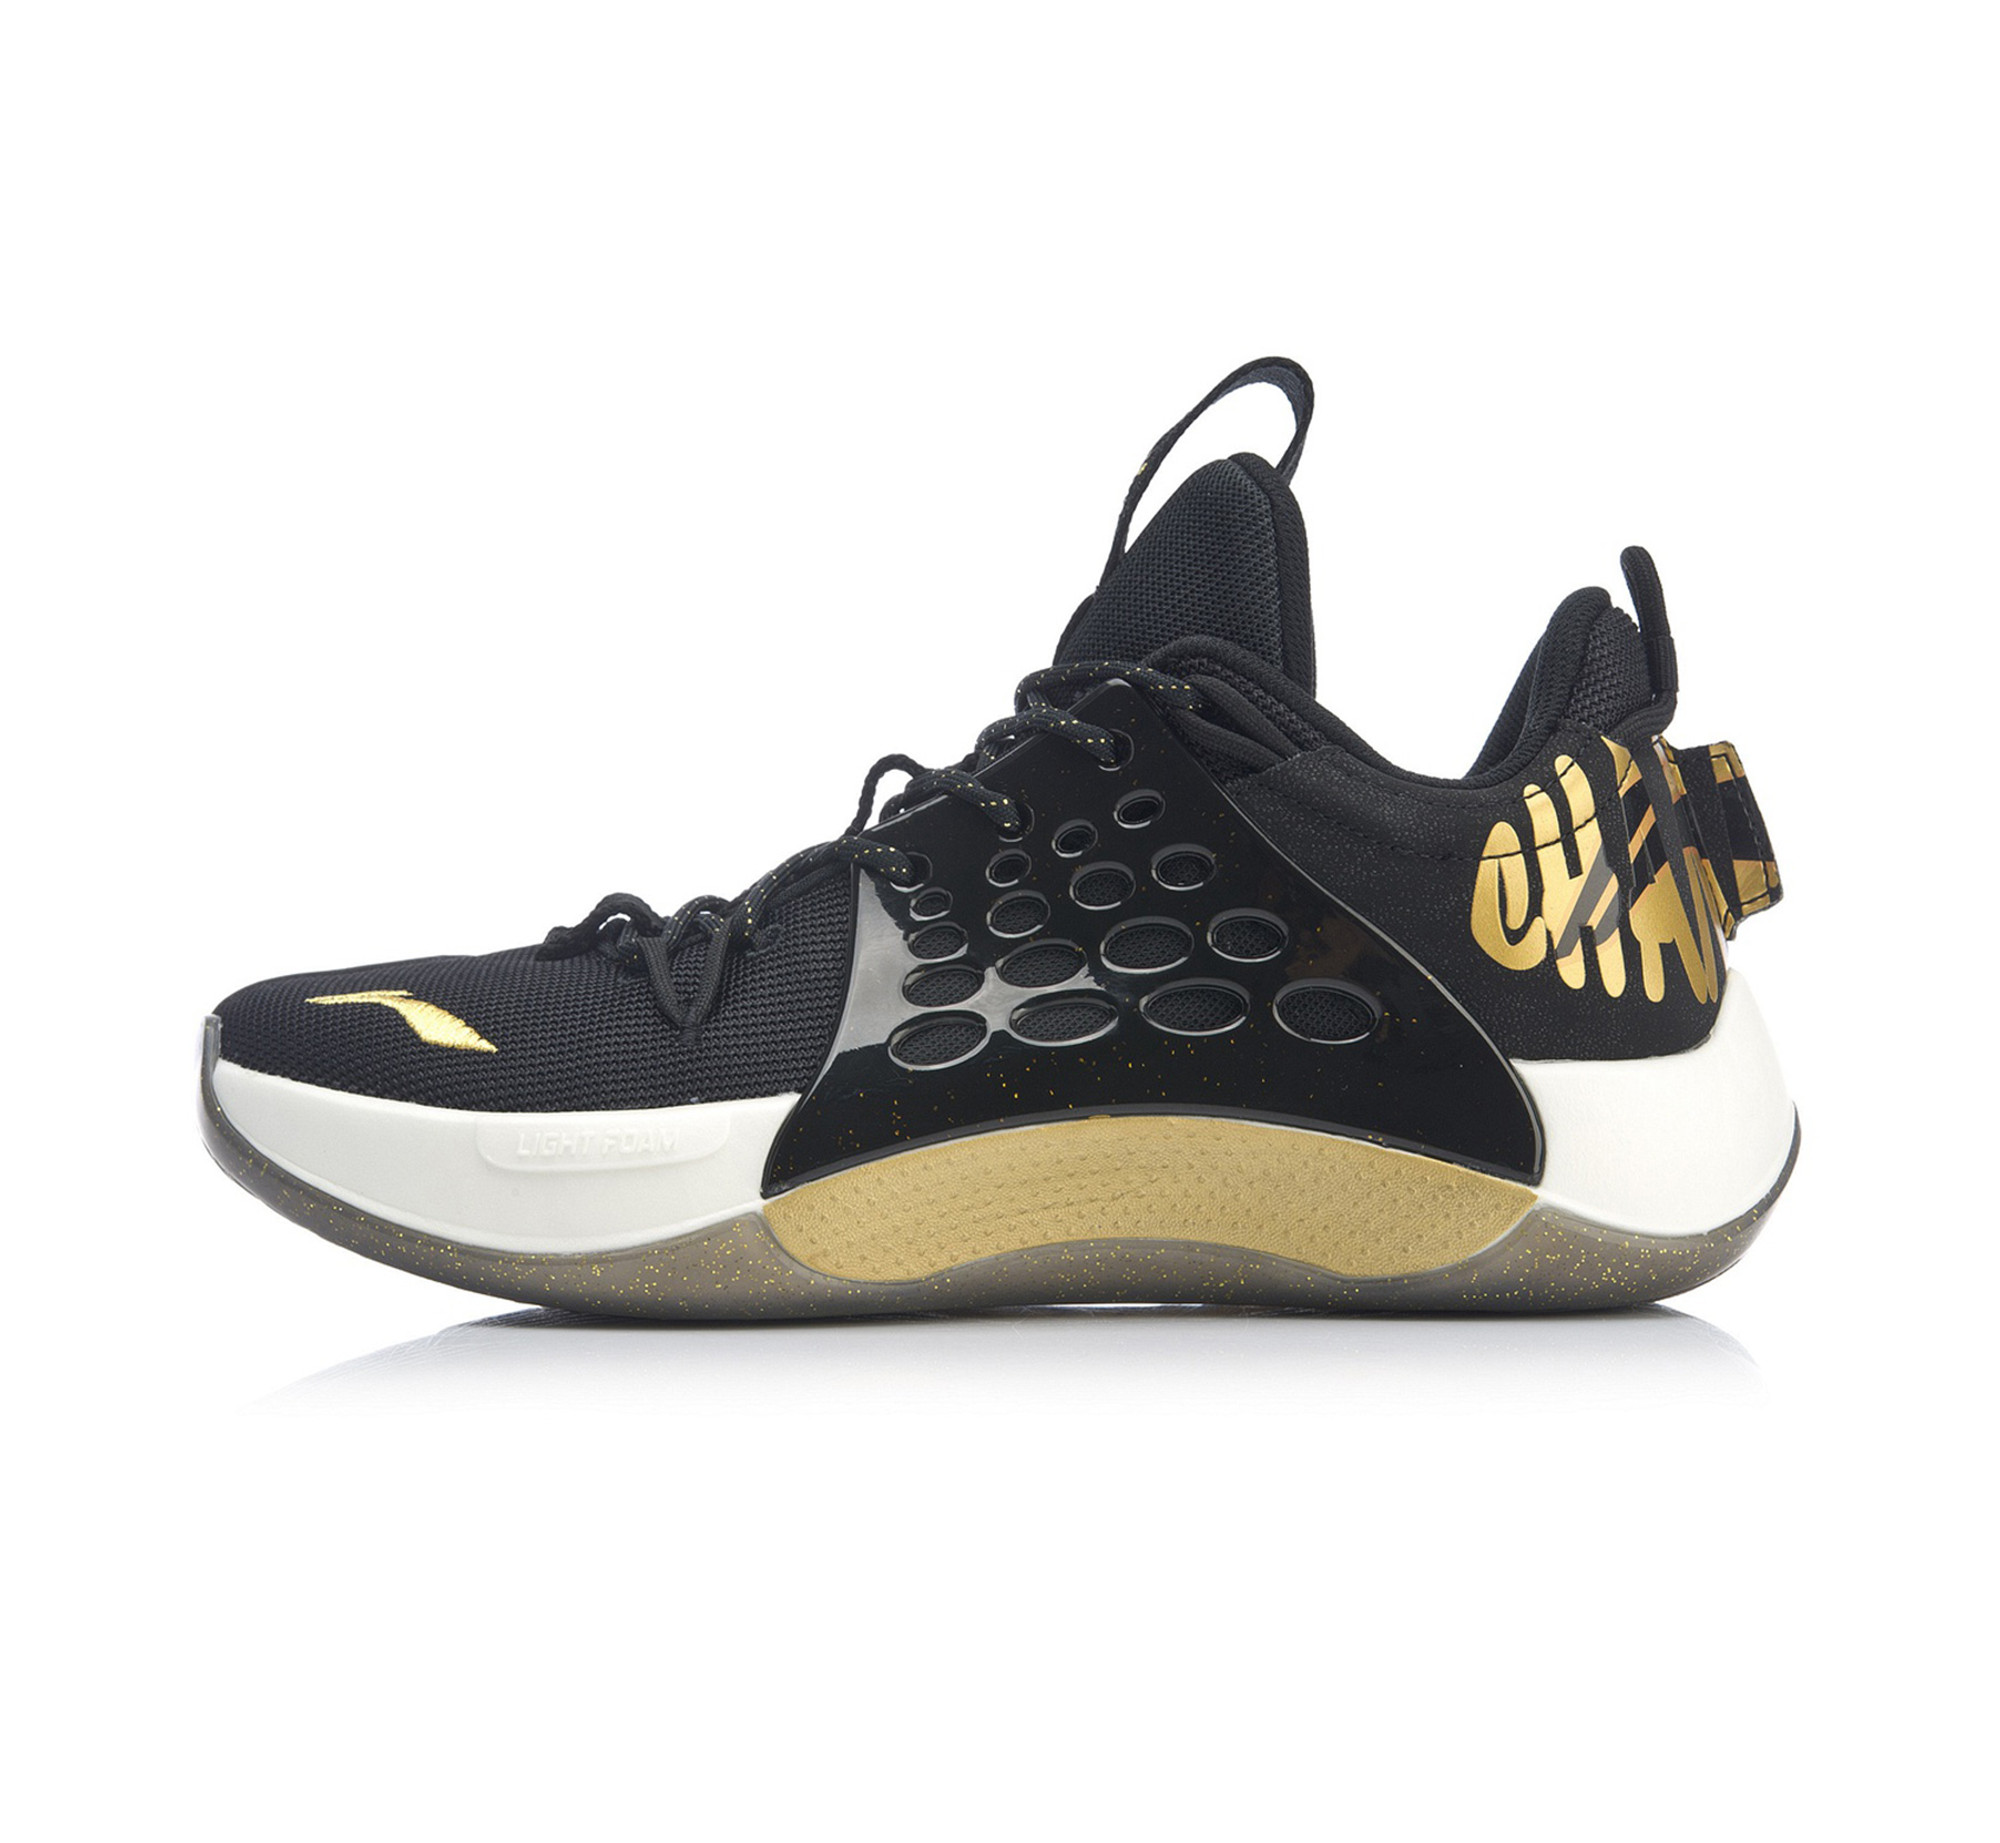 Li-Ning Sonic VII Low Basketball Shoes Shop online now at Sunlight Station